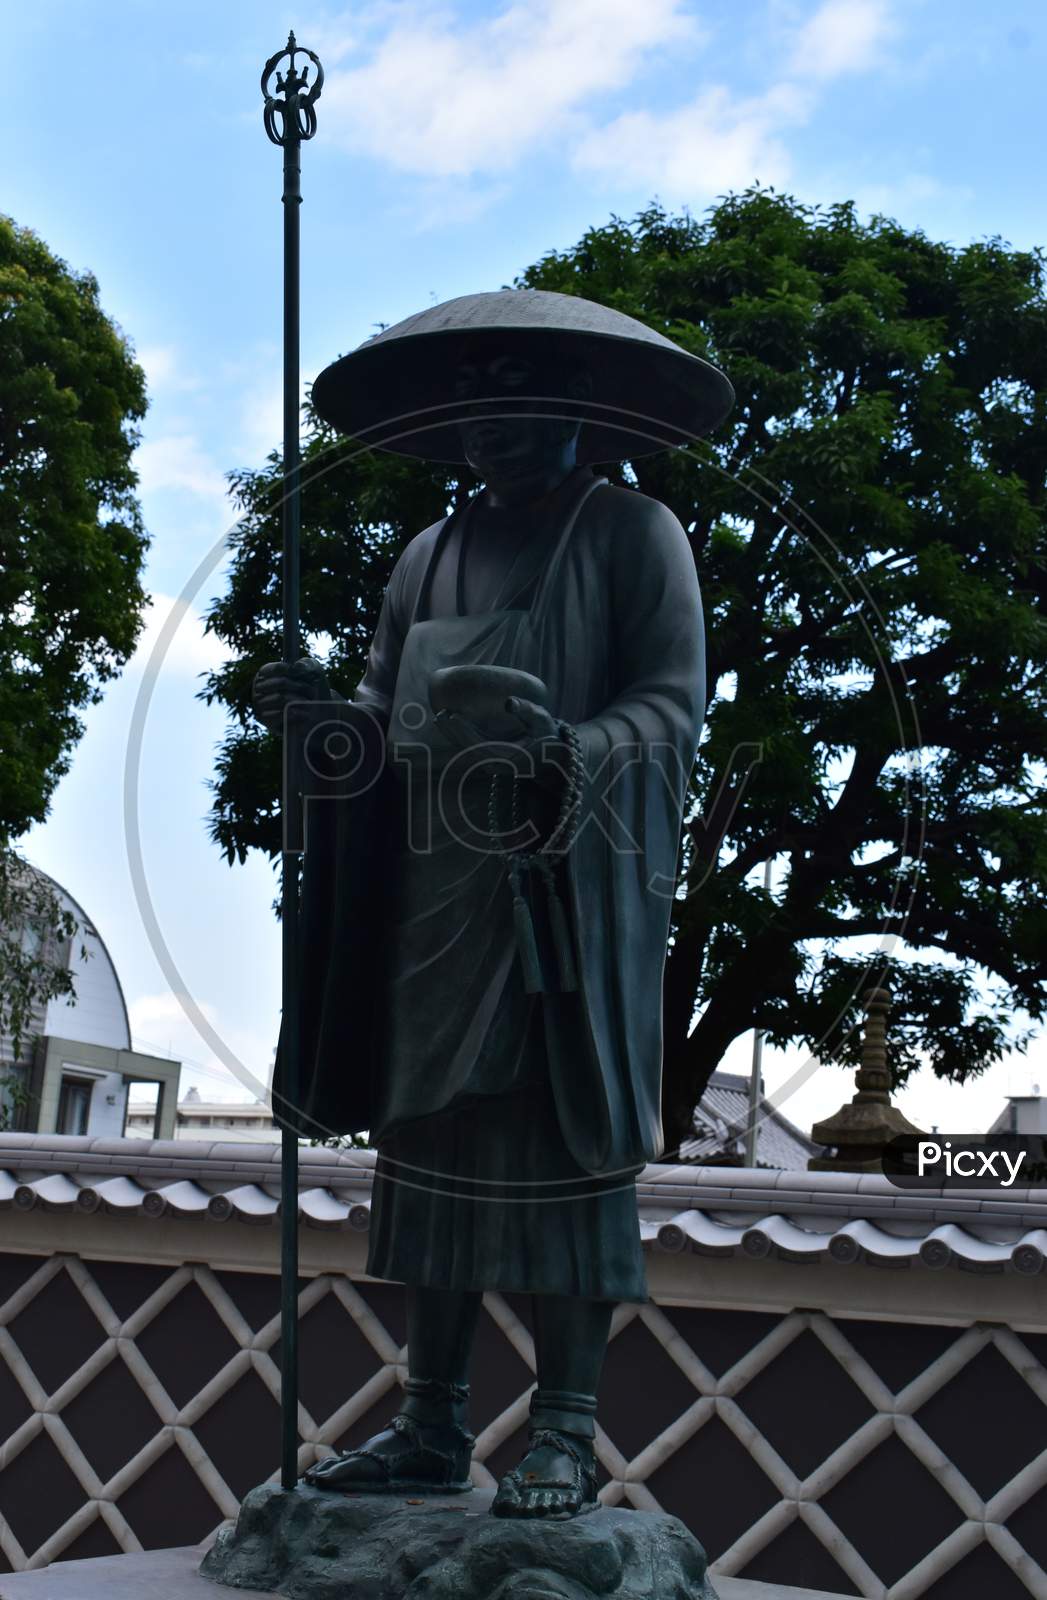 The cultural statue of the monk at the gate of the temple in Tokyo Japan